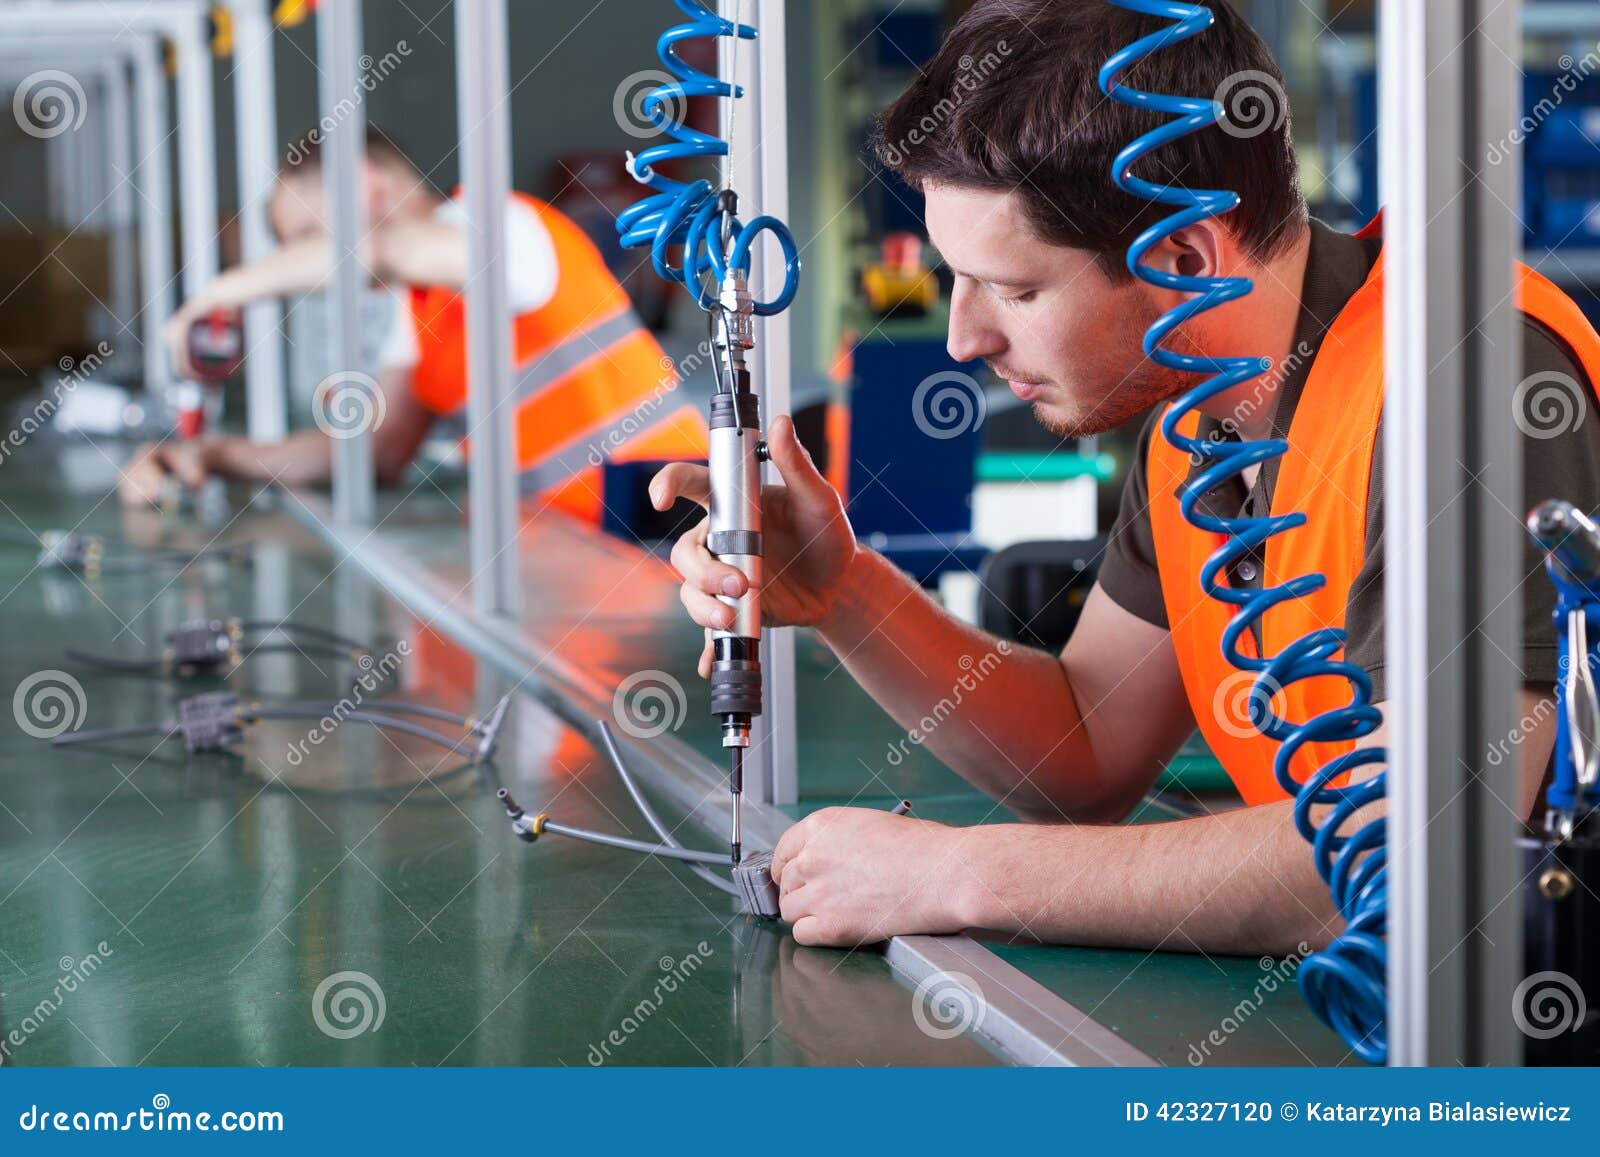 men during precision work on production line